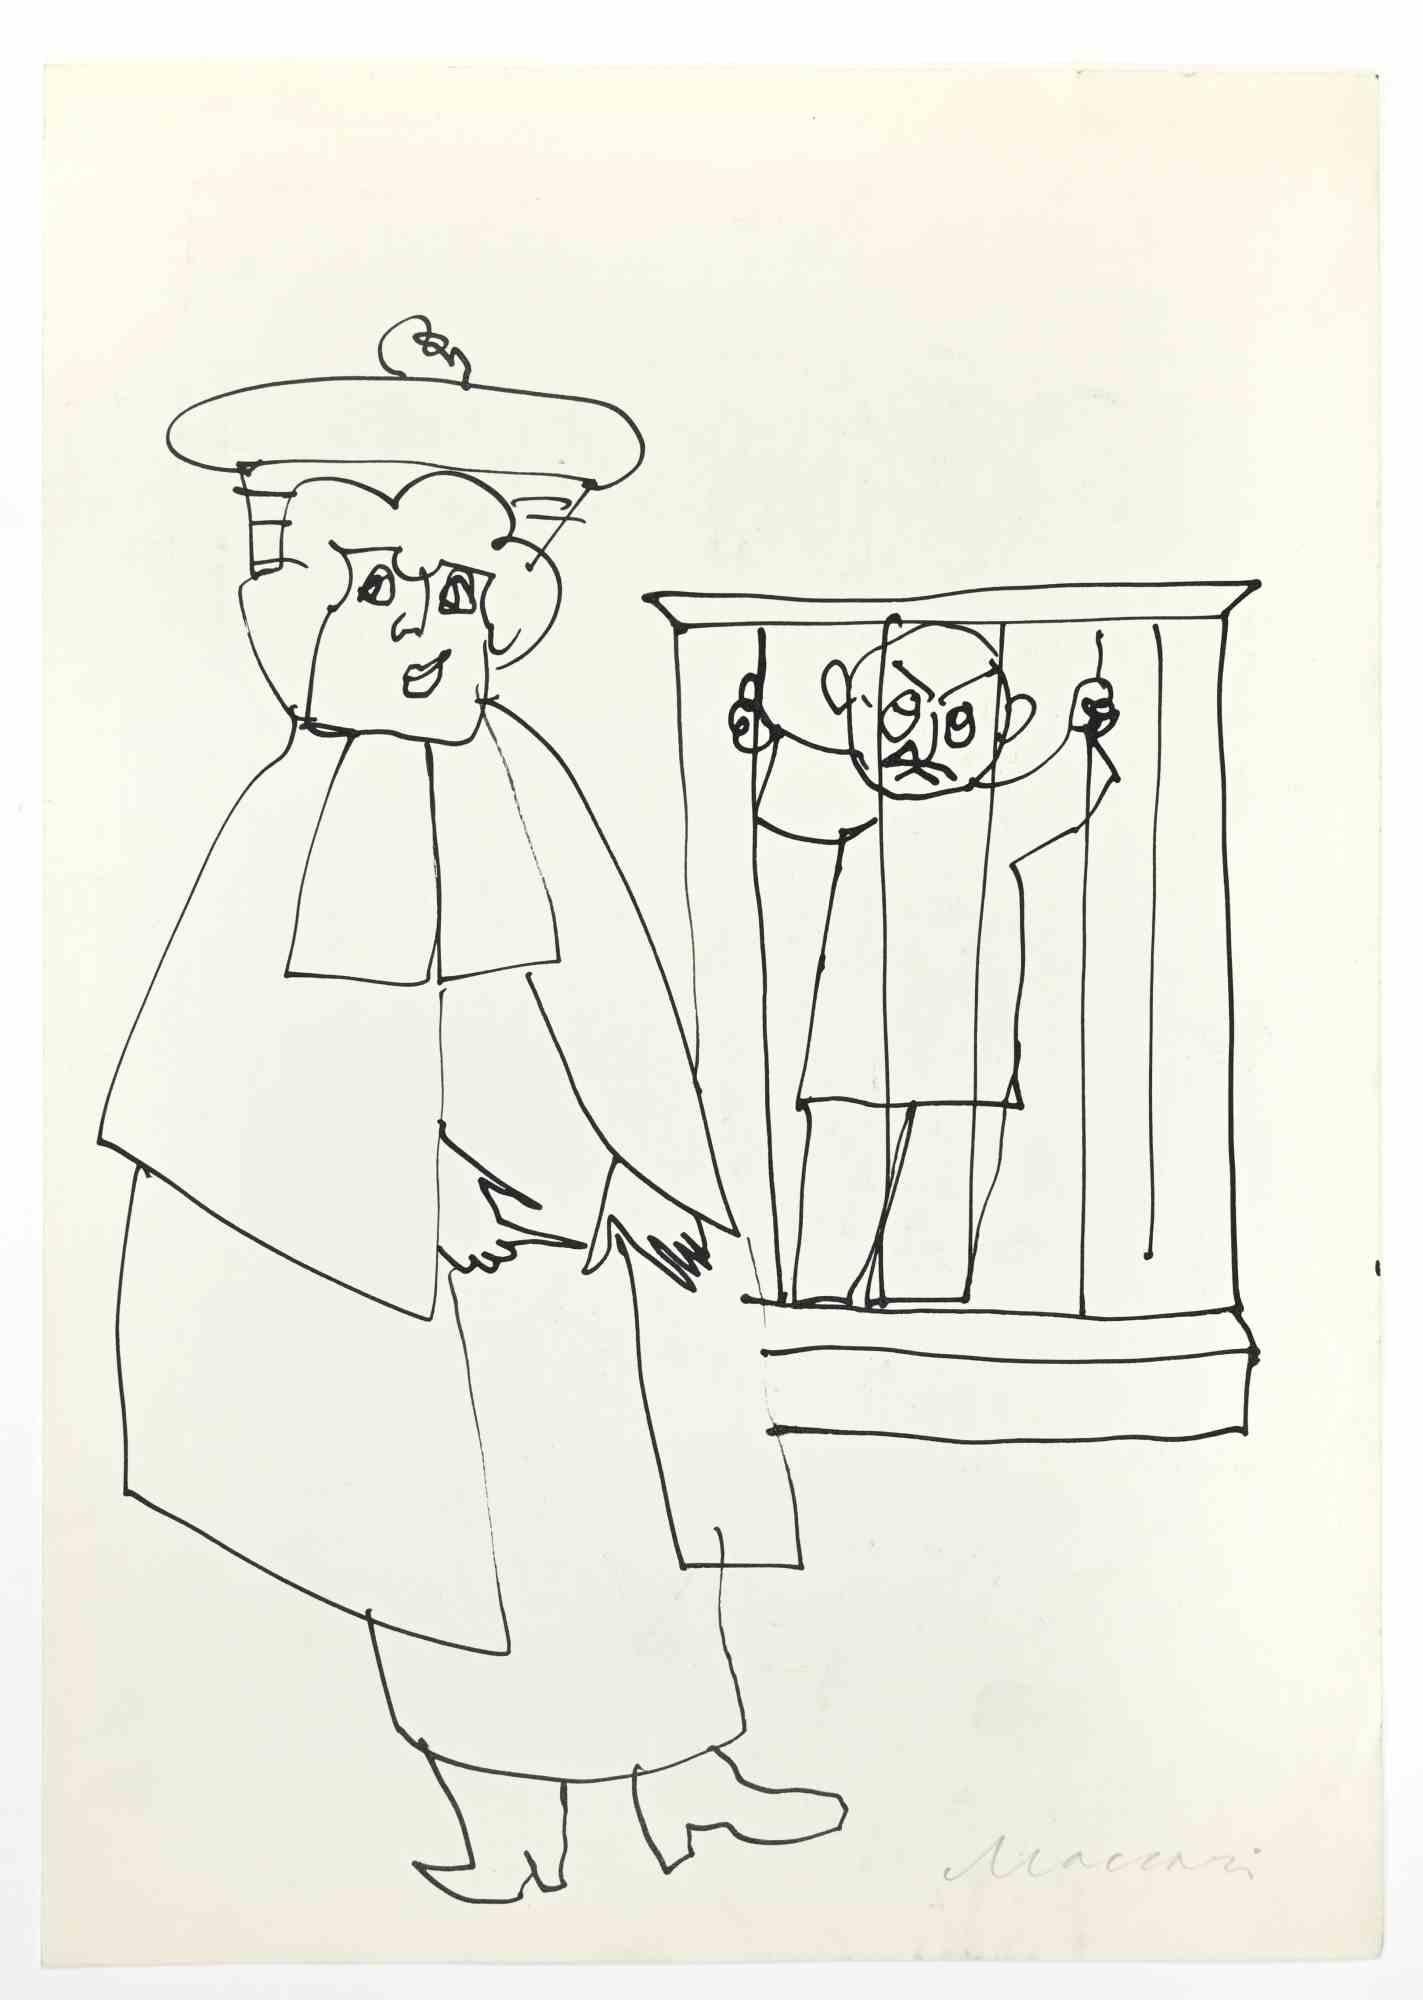 Caged Man is a China Ink Drawing realized by Mino Maccari  (1924-1989) in the 1960s.

Hand-signed on the lower.

Good condition with slight foxing.

Mino Maccari (Siena, 1924-Rome, June 16, 1989) was an Italian writer, painter, engraver and